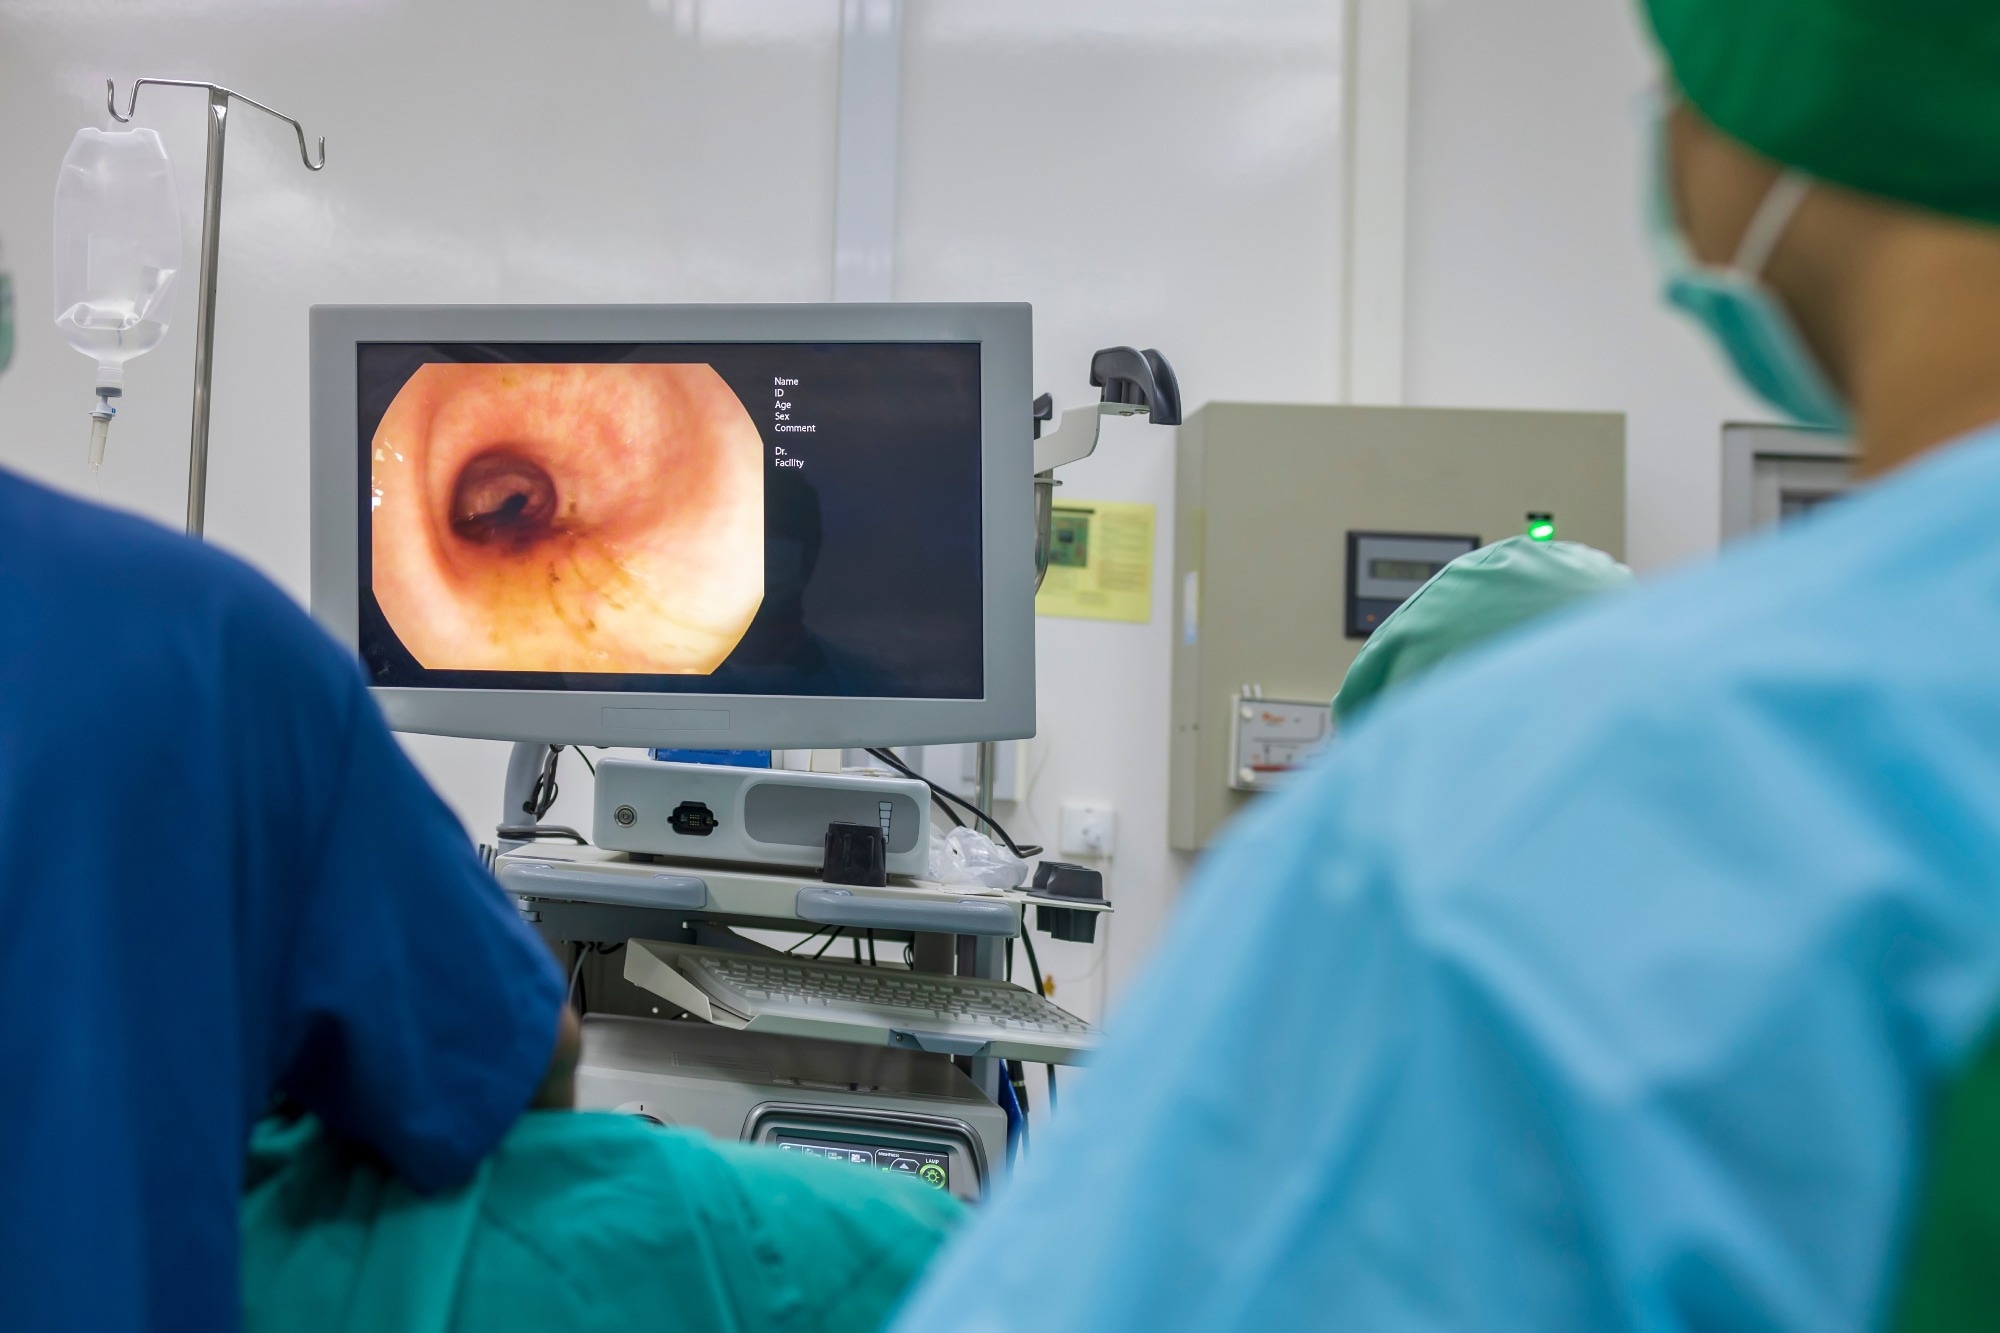 Study: Artificial intelligence for colorectal neoplasia detection during colonoscopy: a systematic review and meta-analysis of randomized clinical trials. Image Credit: Peter Porrini / Shutterstock